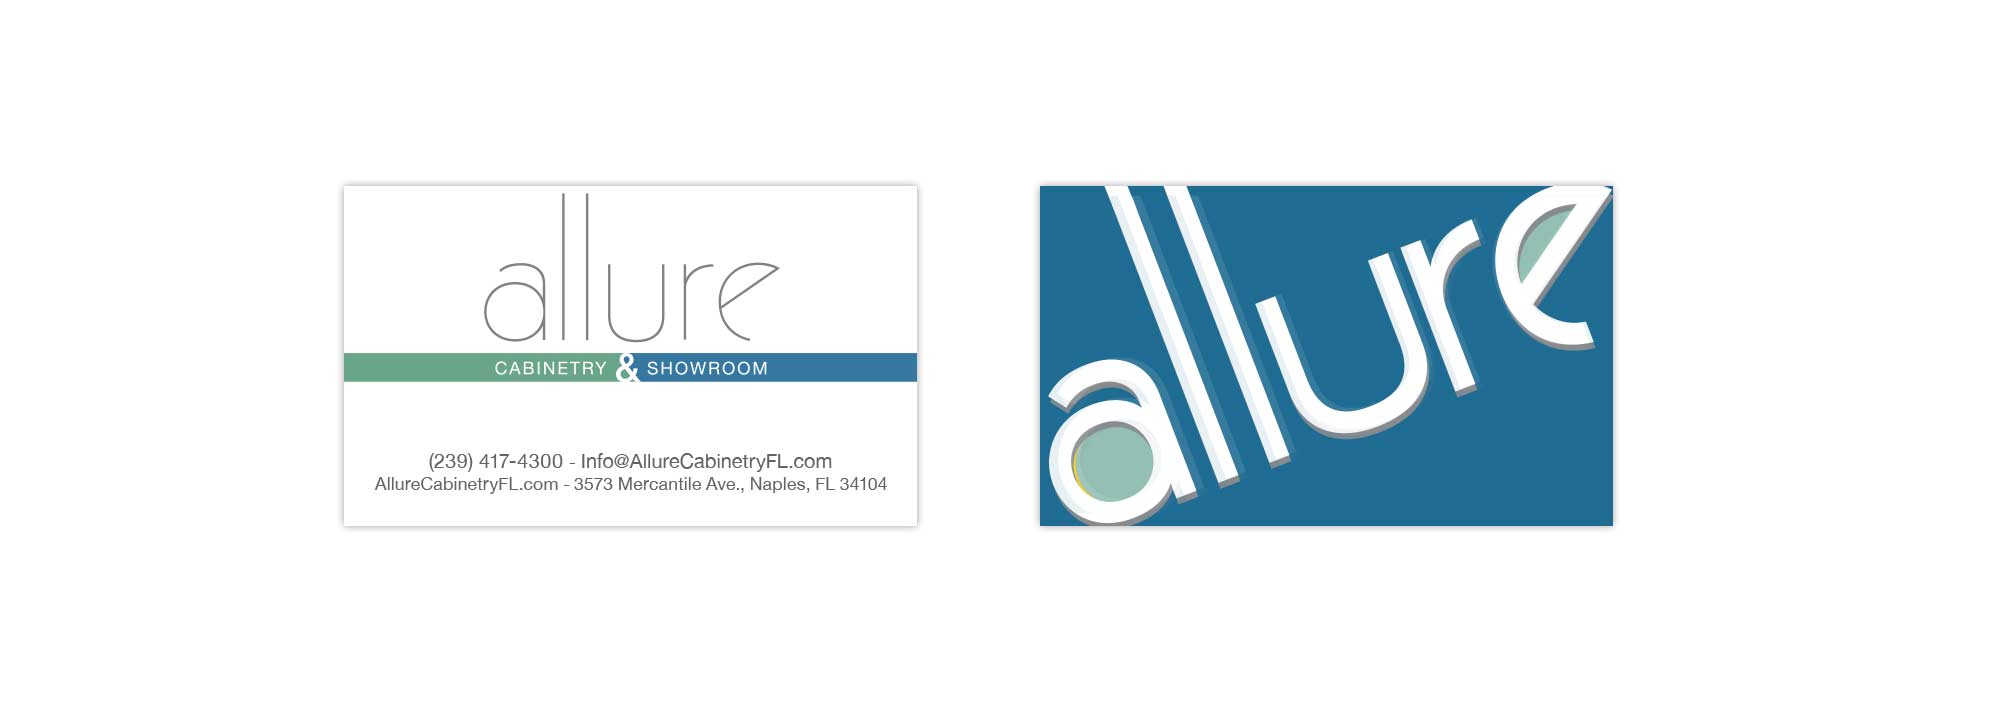 Allure Cabinetry & Showroom Business Cards